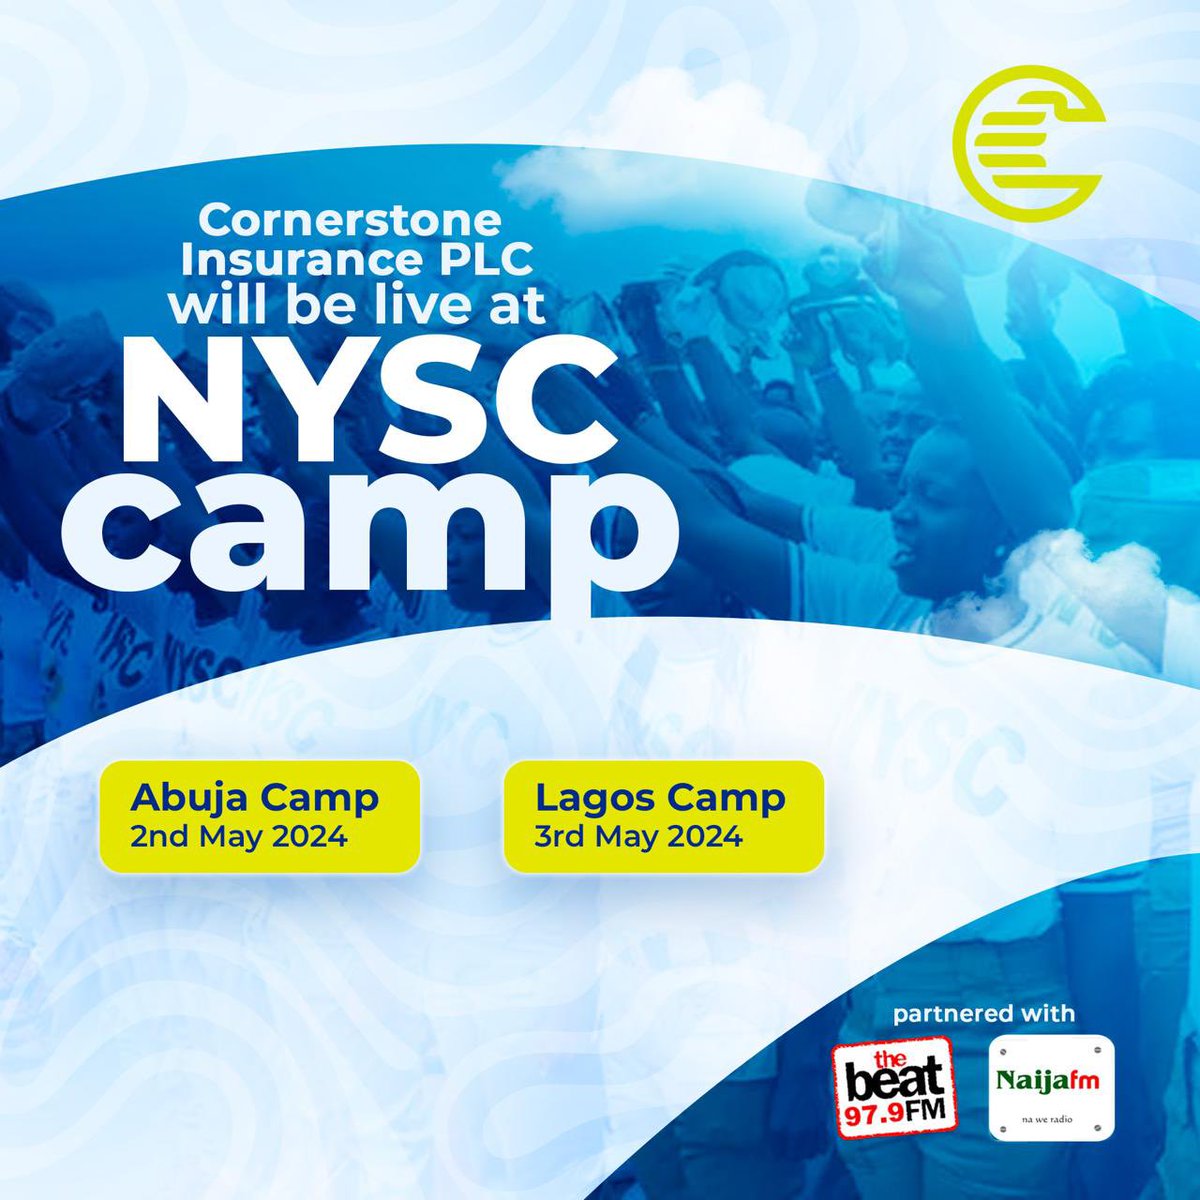 We will be live at NYSC Abuja camp on the 2nd of May 2024 and Lagos camp on the 3rd of May 2024.

#NYSC #CornerstoneInsurancePLc #TheFutureAssured